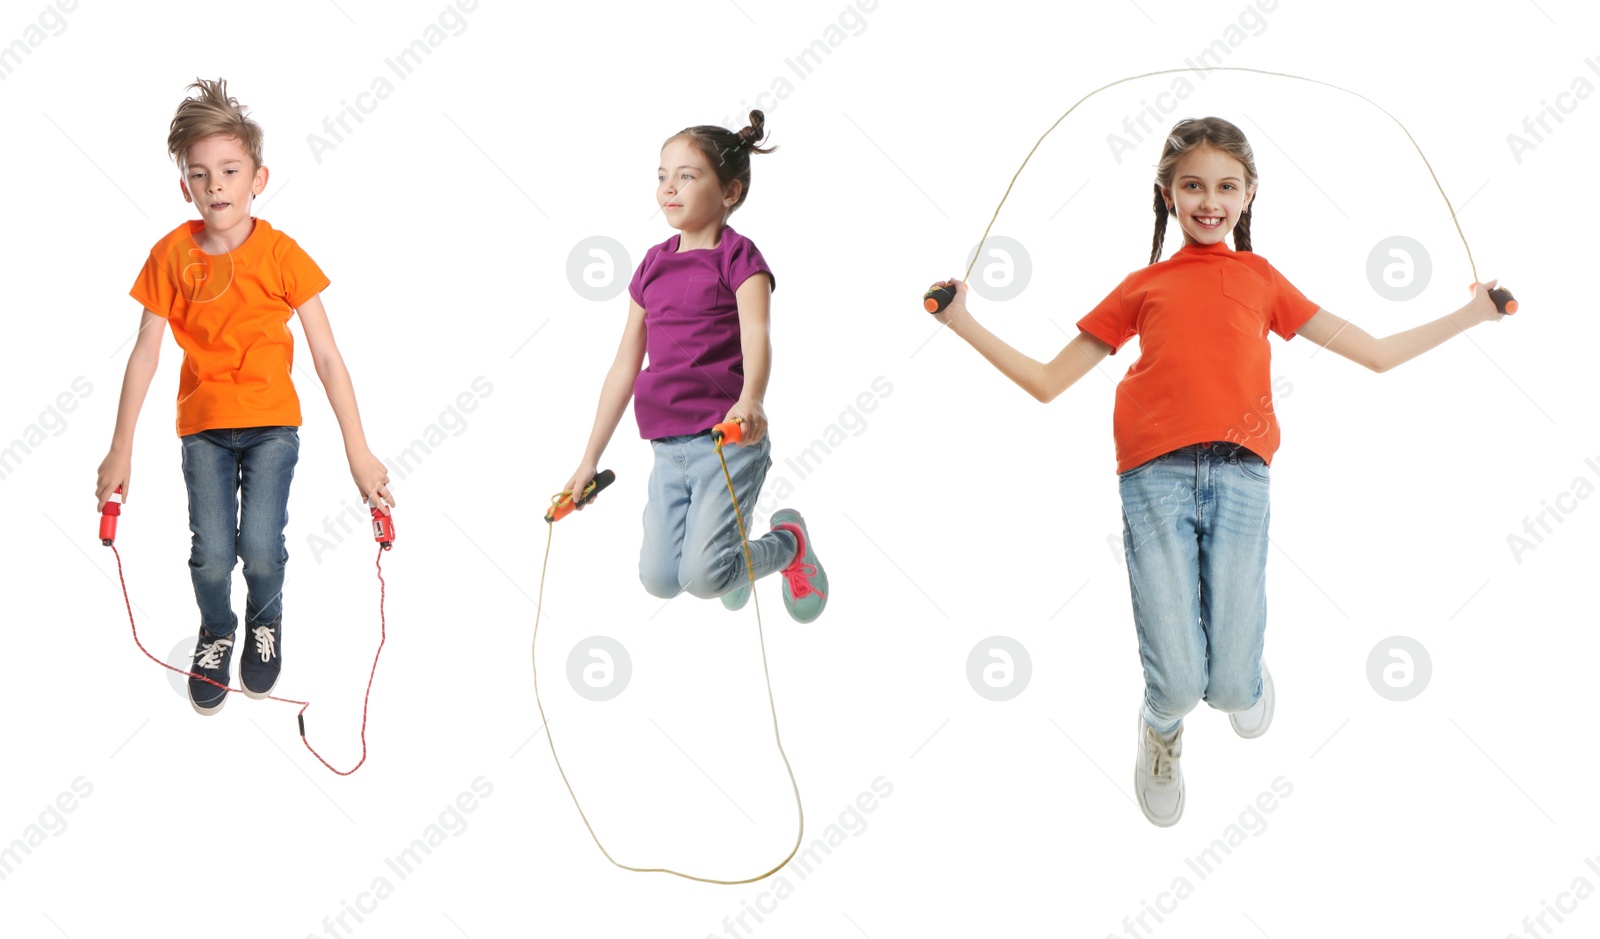 Image of Cute happy children with jumping ropes on white background, collage. Banner design